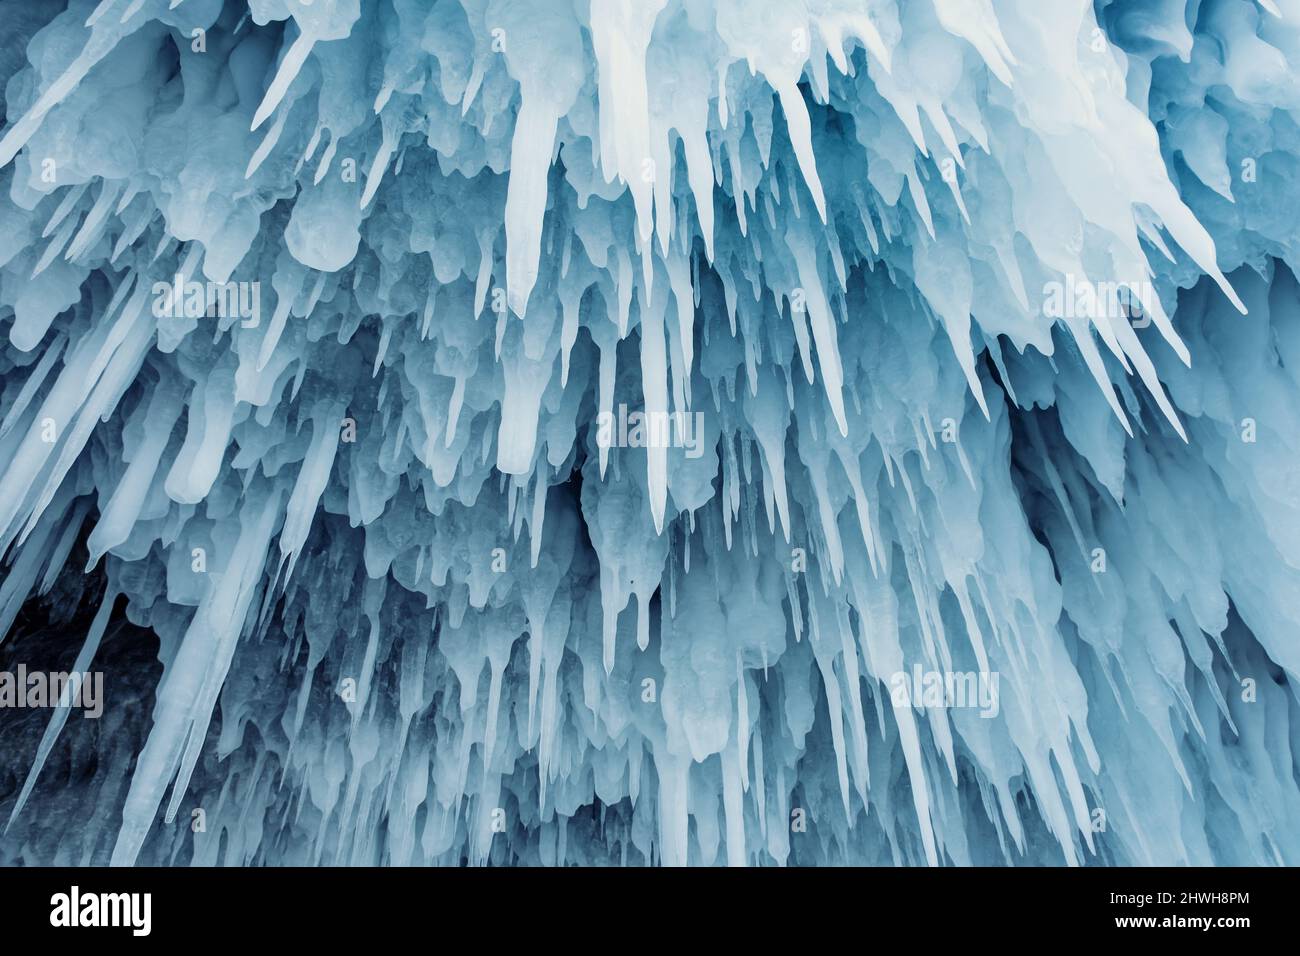 Blue ice and icicles in grotto Stock Photo